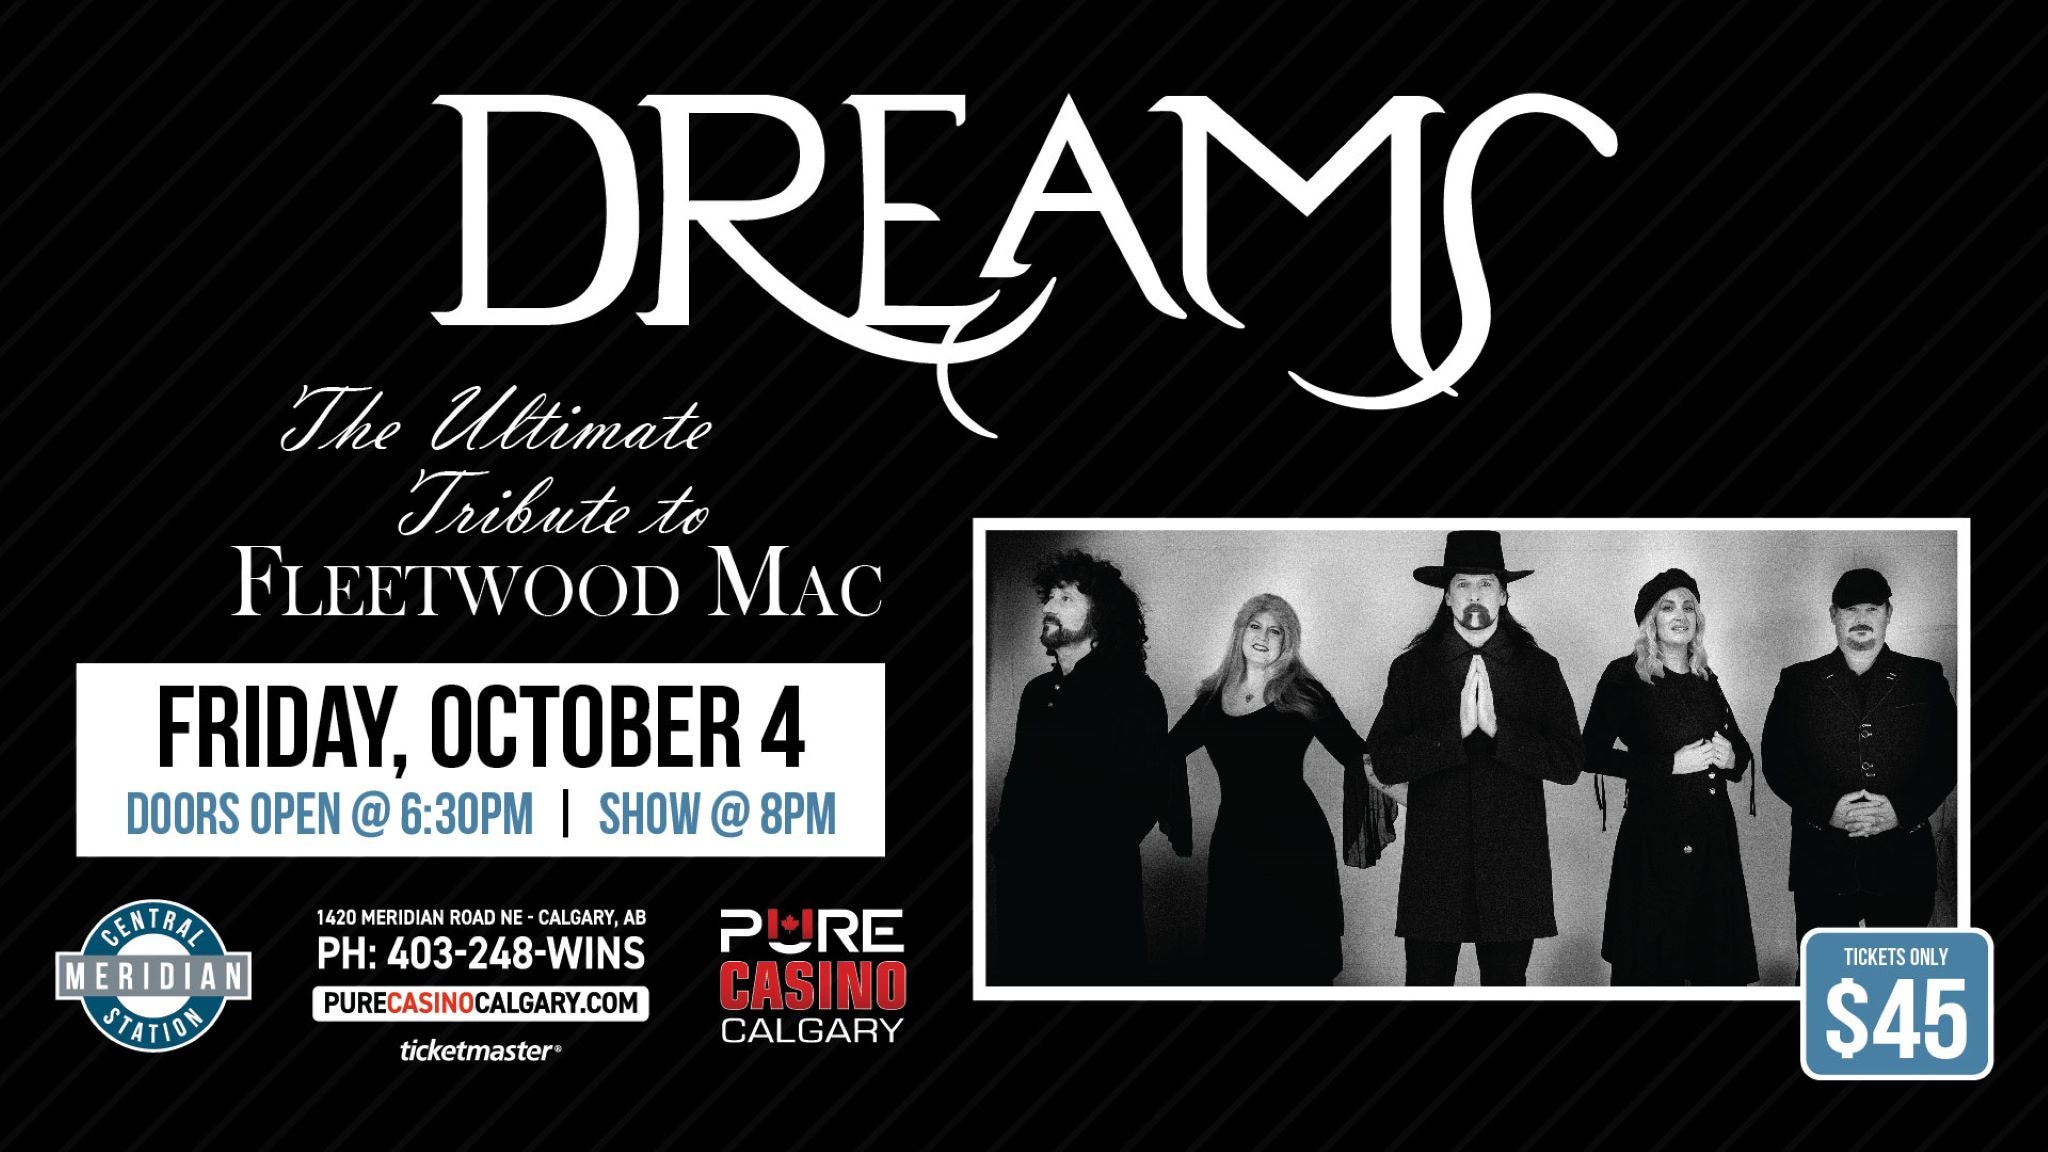 Dreams - The Ultimate Tribute to Fleetwood Mac